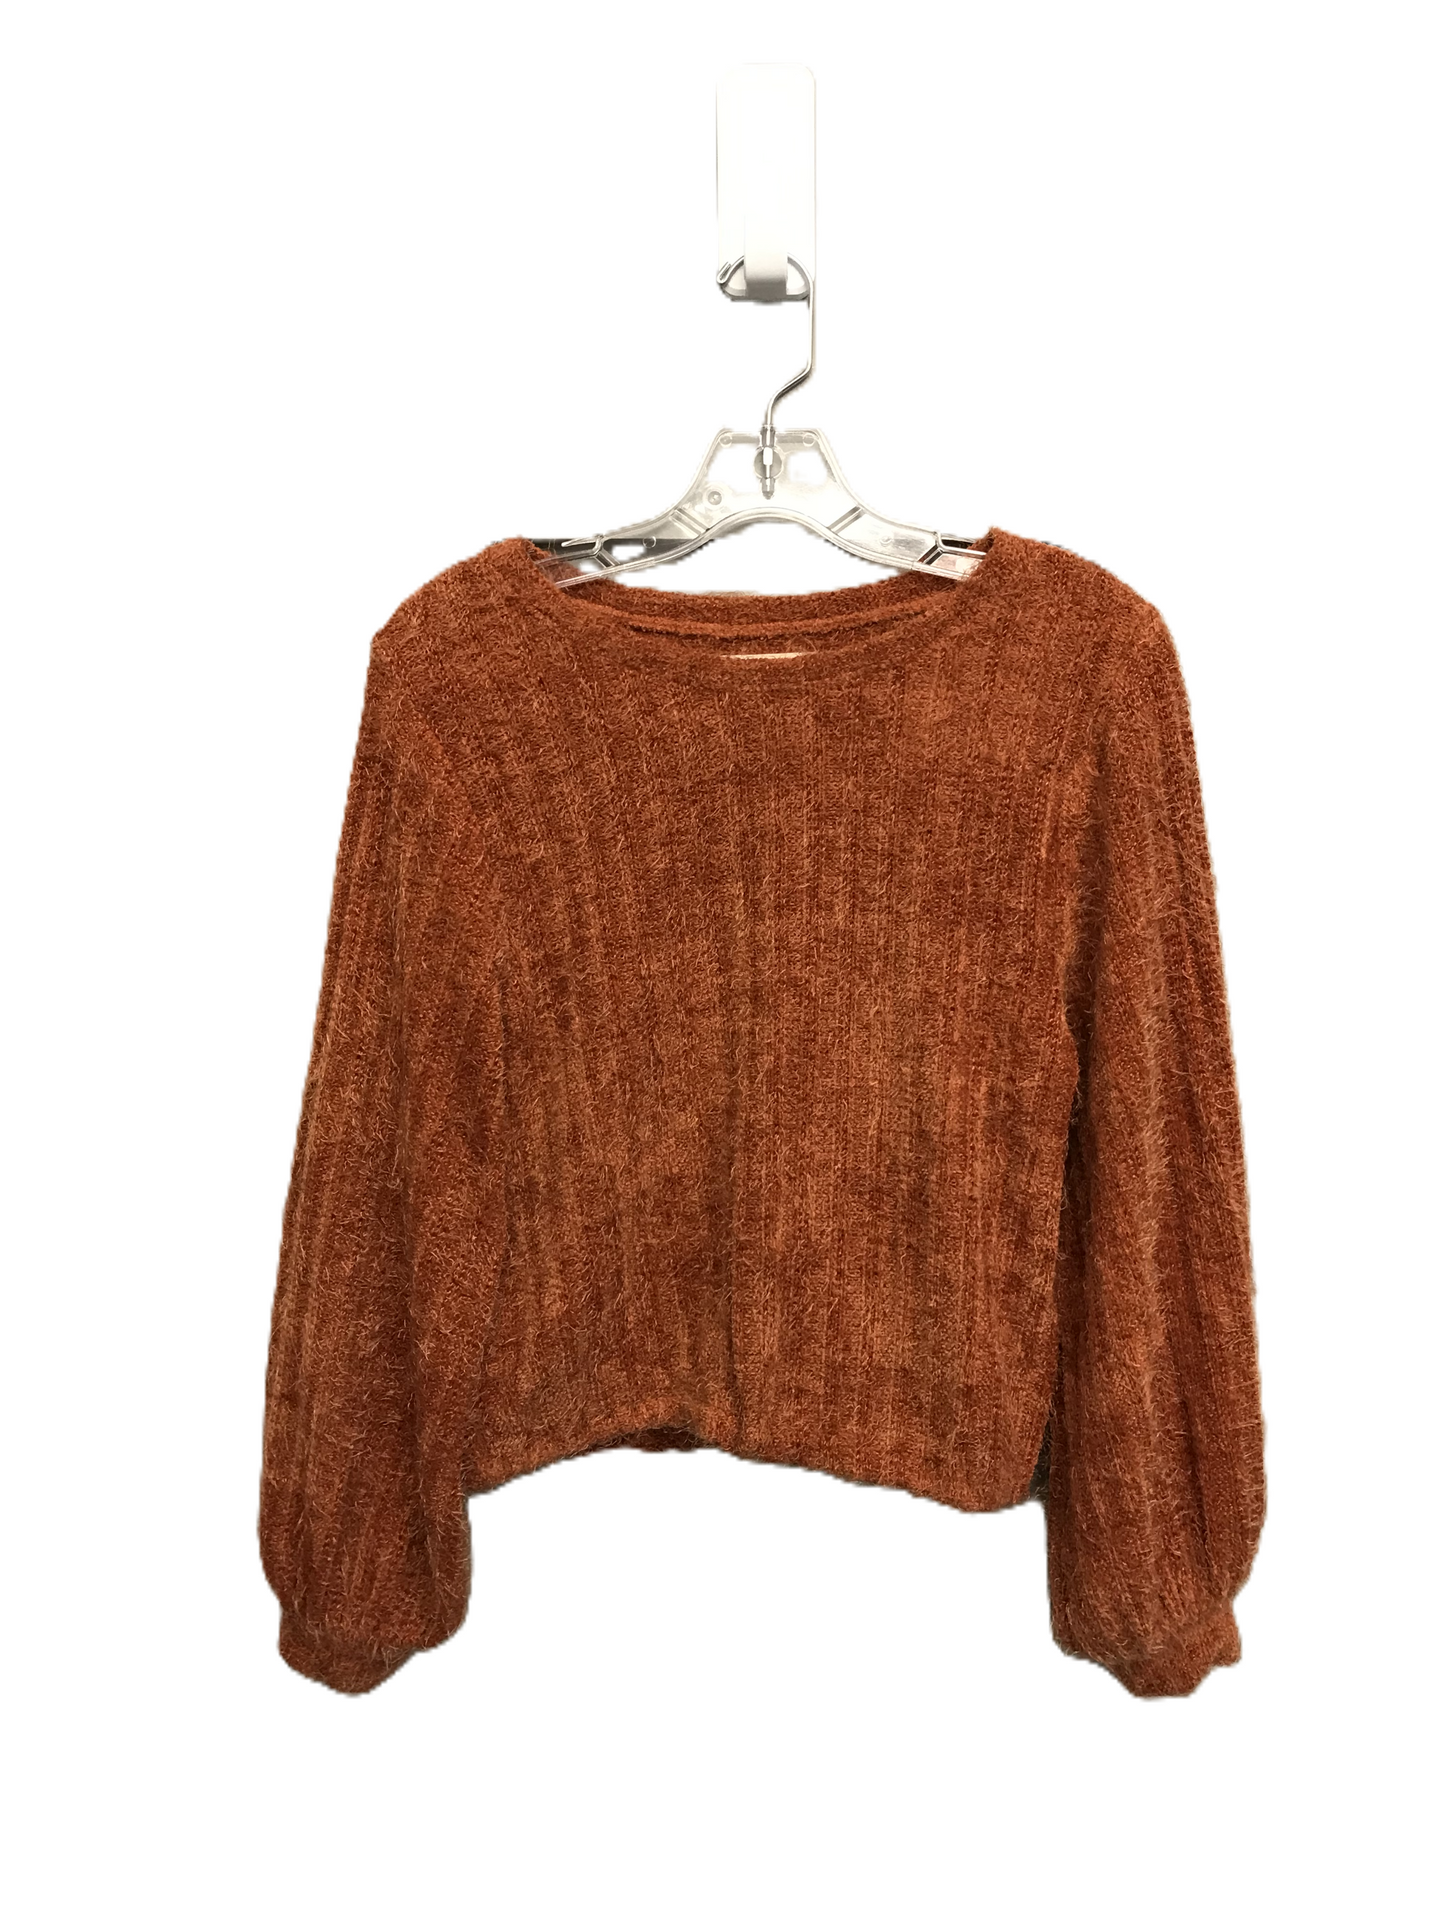 Sweater By Altard State  Size: M